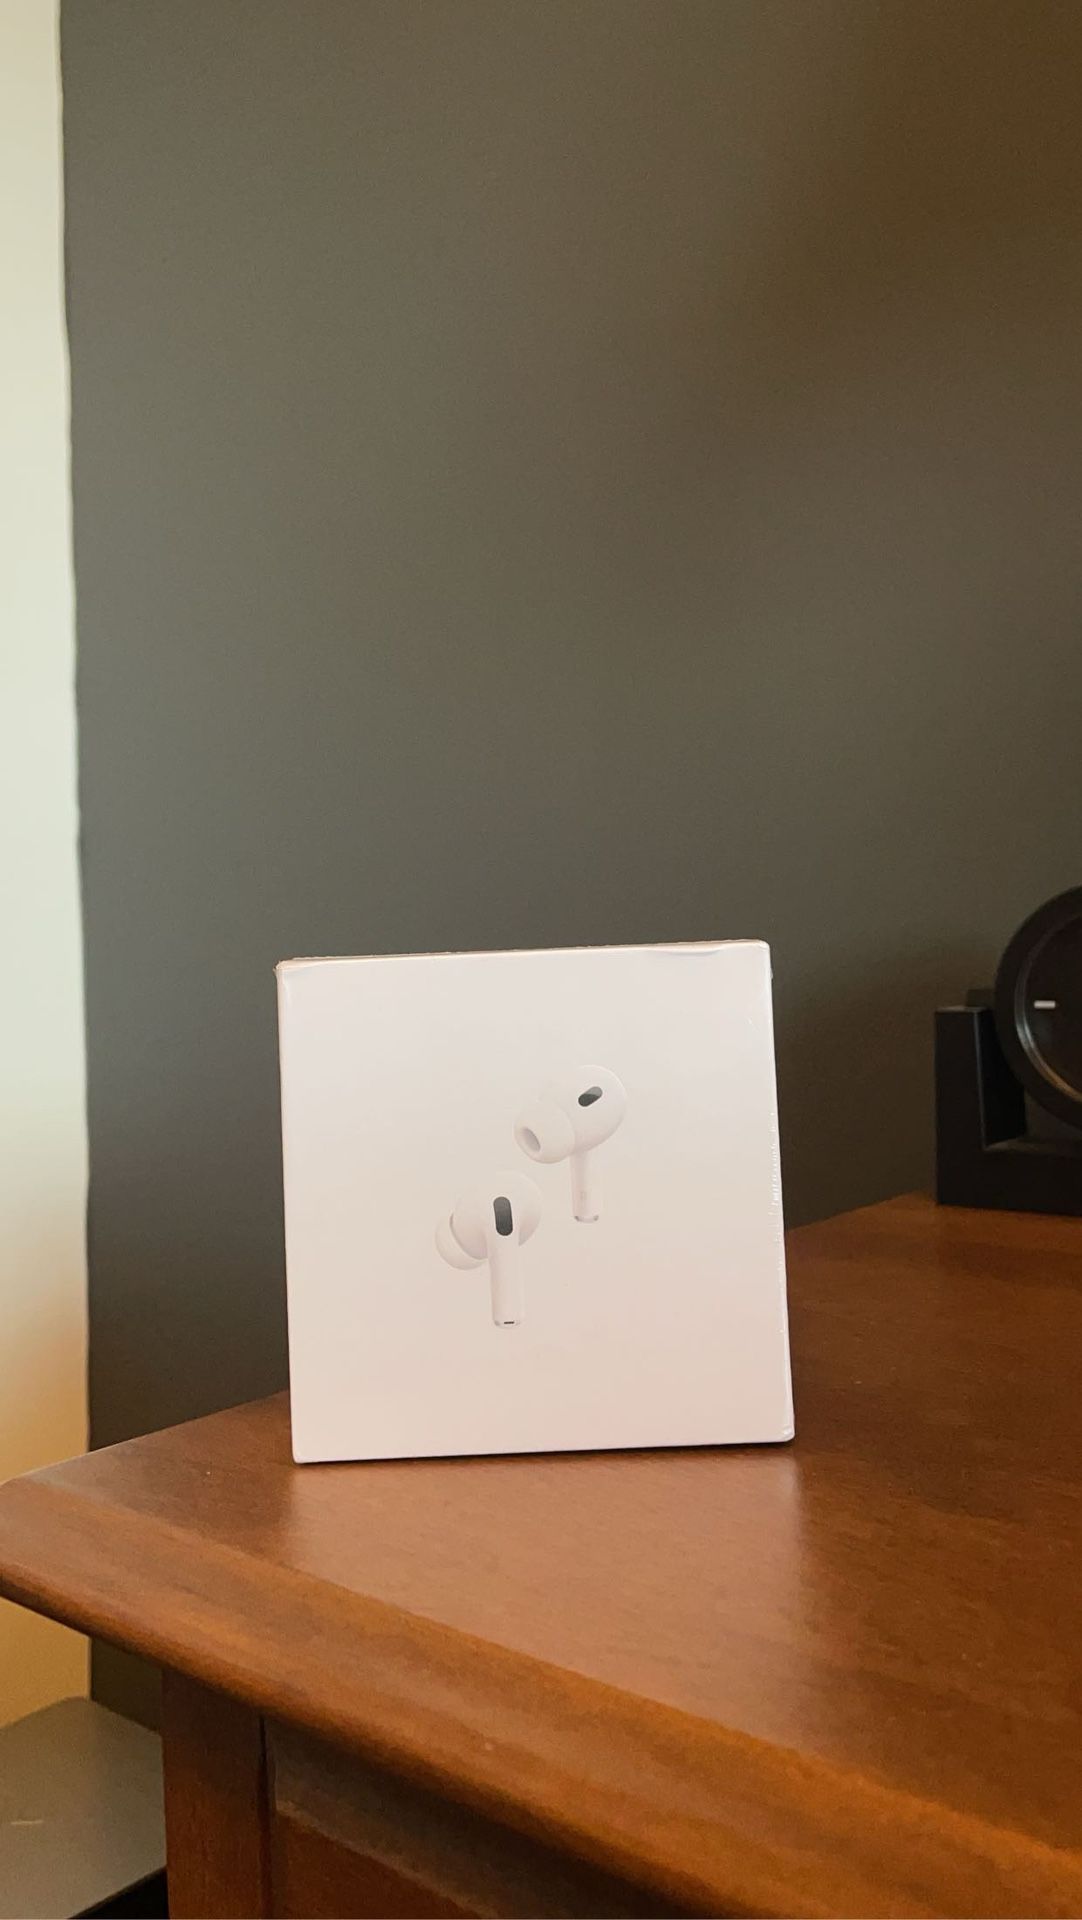 Airpods Pro 2nd Gen (NEW)